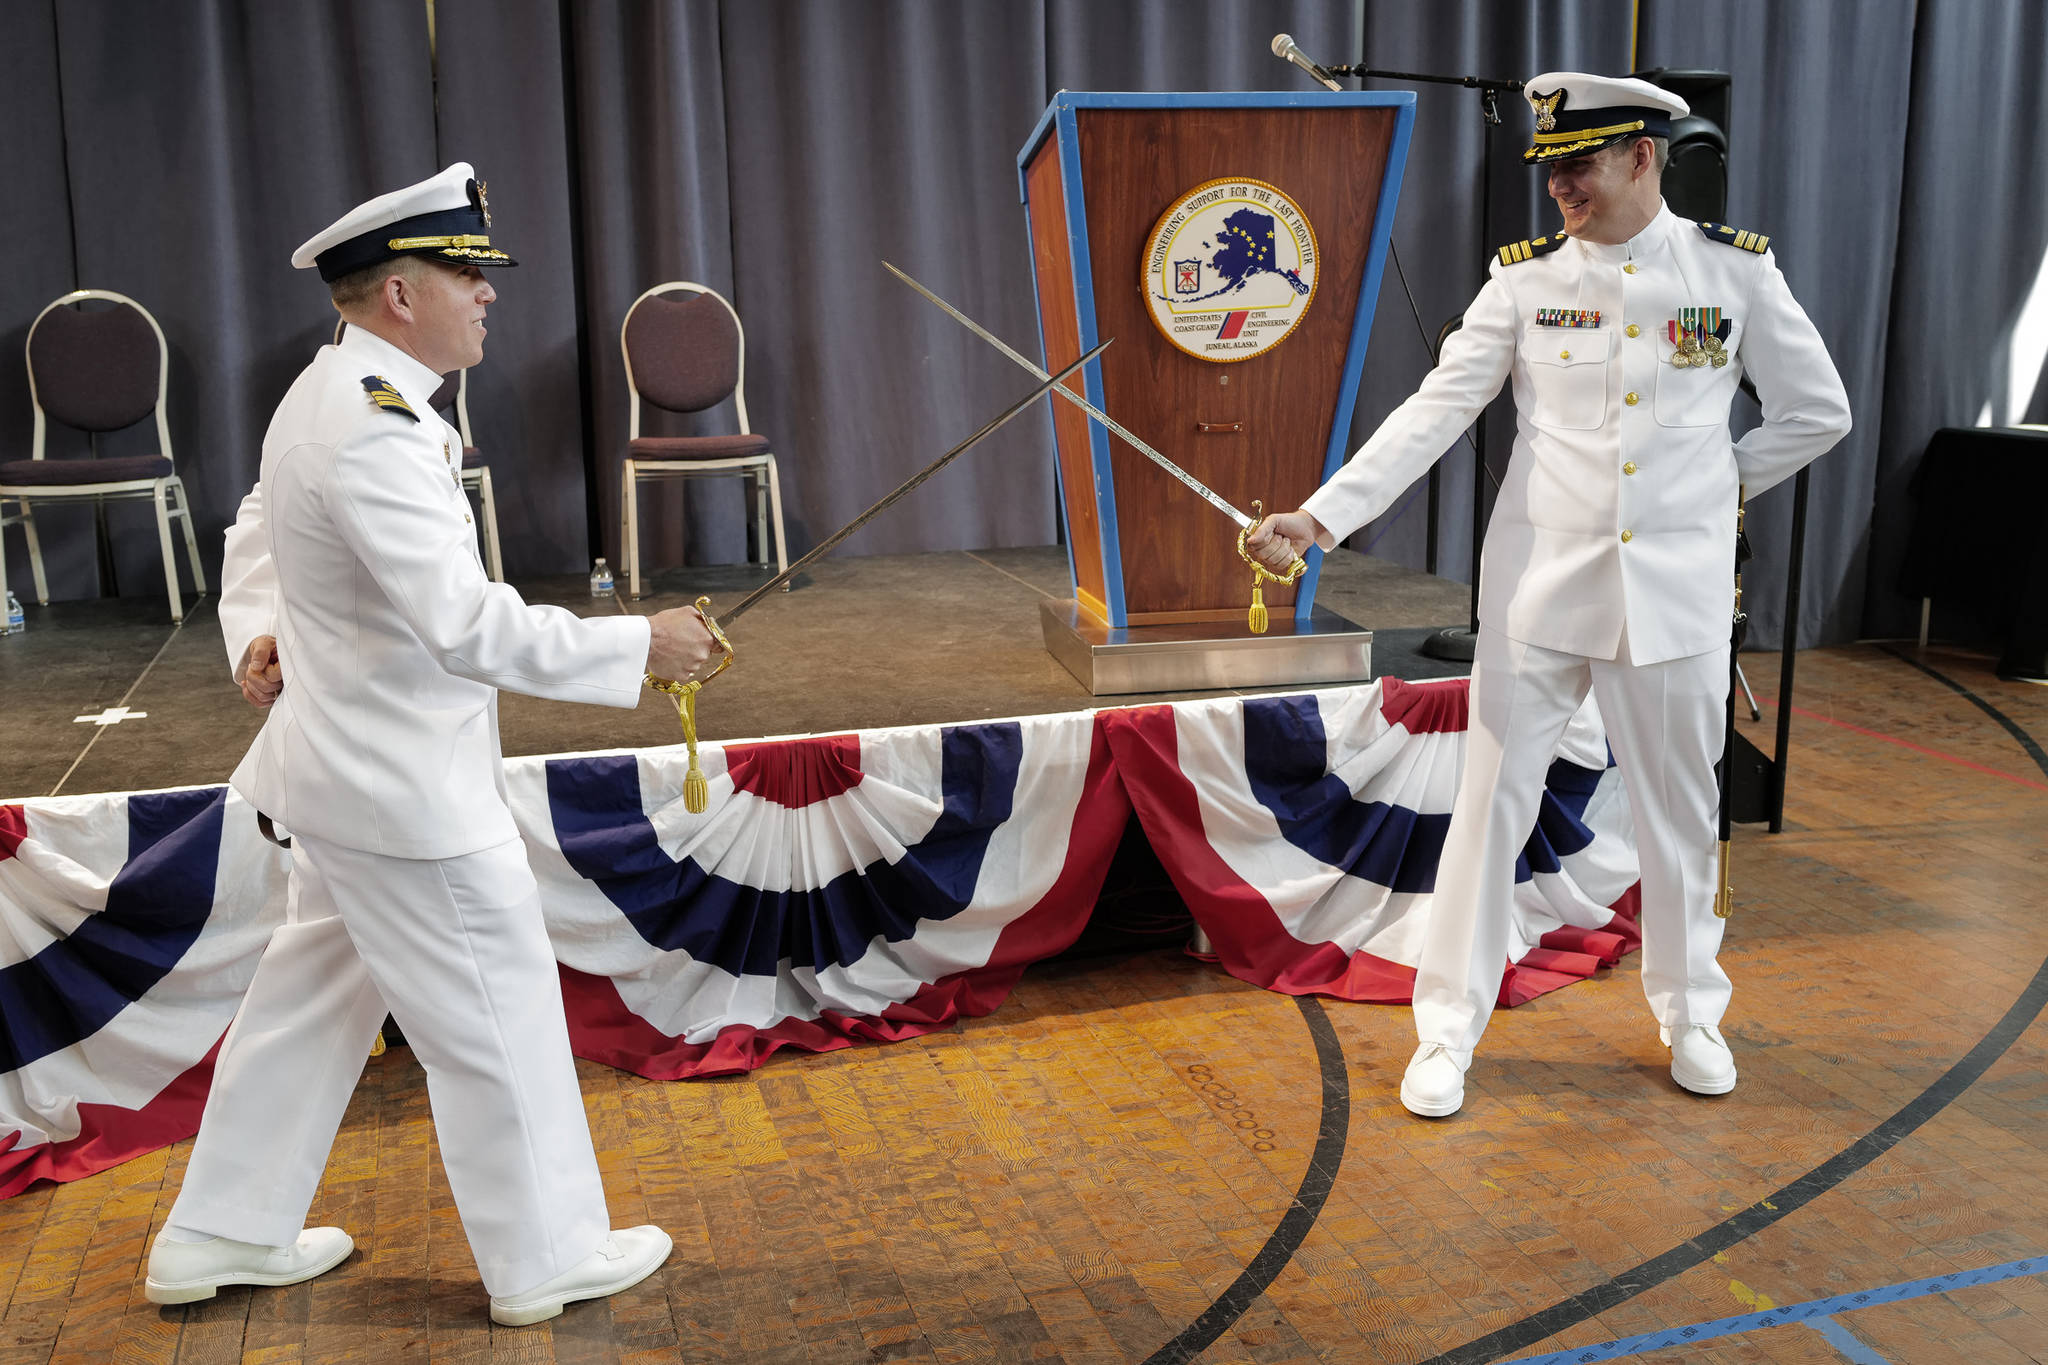 U.S. Coast Guard Commander Andrew S. Joca, left, playfully duels with Commander Nathan L. Rumsey, right, after a Change of Command ceremony at the Juneau Arts and Culture Center on Thursday, June 20, 2019. Outgoing Commander Joca assumed command of the Civil Engineering Unit in Juneau in May 2016 and will become the Director of Operational Logistics in Norfolk, Virginia. Commander Rumsey’s most recent assignment was the Engineer Officer and Facilities Engineer at Sector New York. Joca carries his father’s sword who was a Navy veteran of the Vietnam War. (Michael Penn | Juneau Empire)